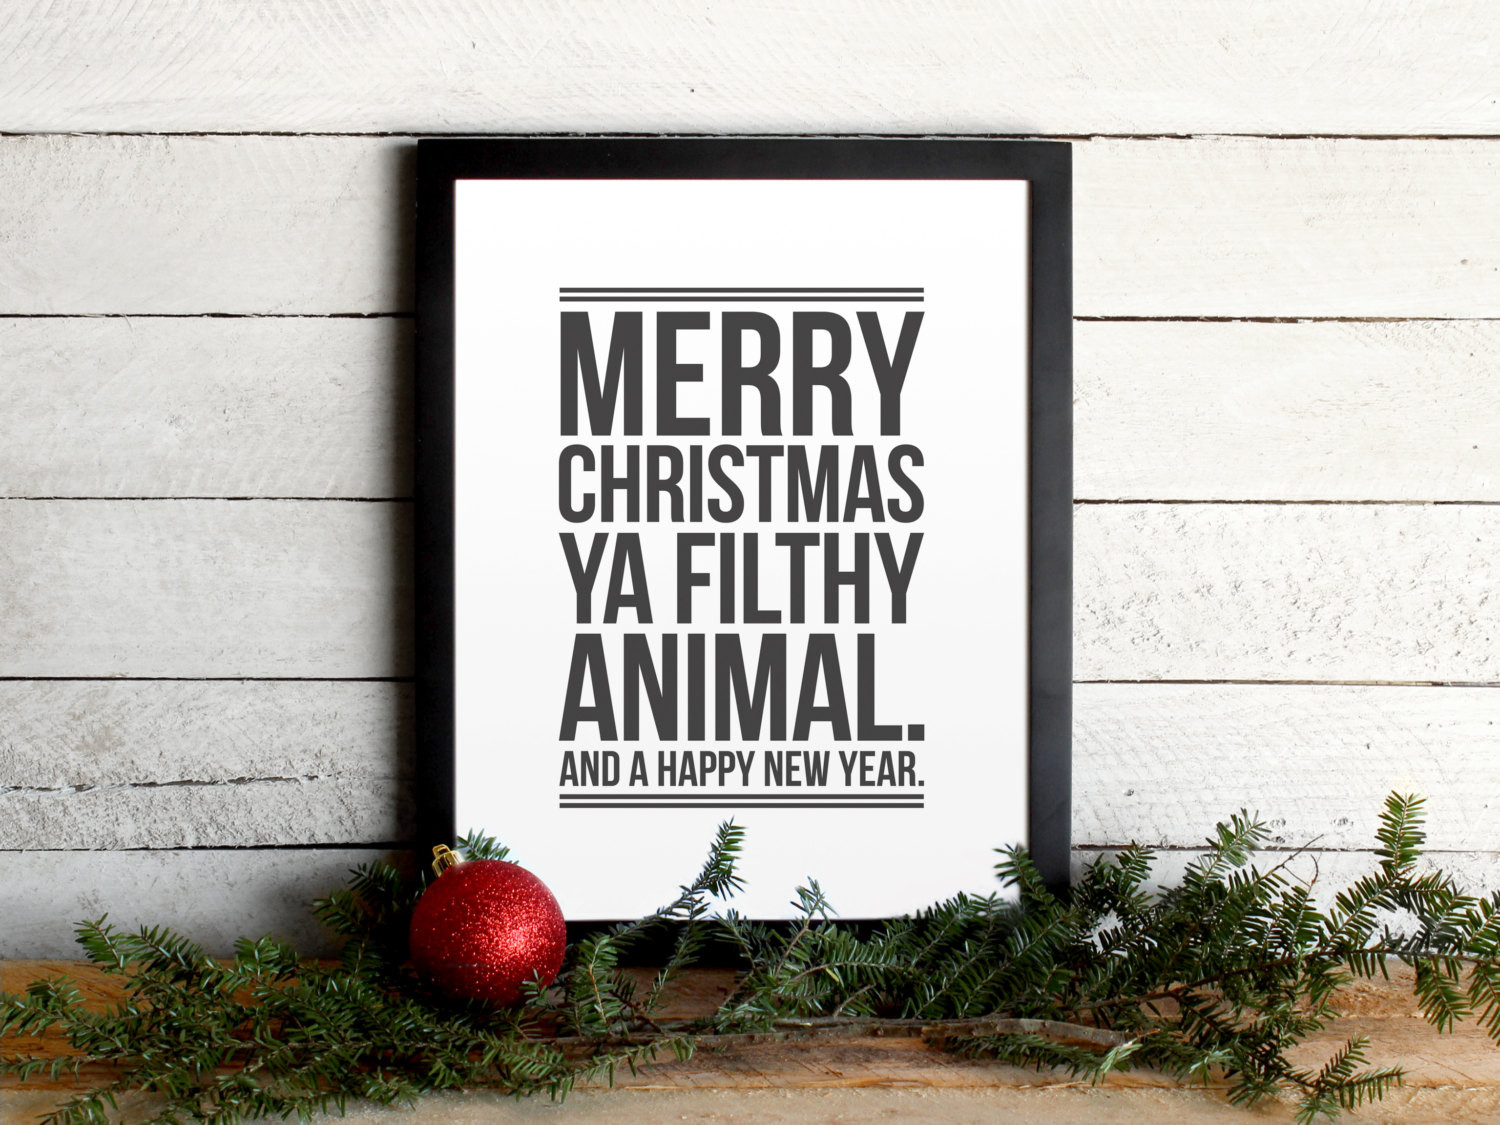 Merry Christmas Ya Filthy Animal Quote
 Merry Christmas Ya Filthy Animal Home Alone Movie Quote